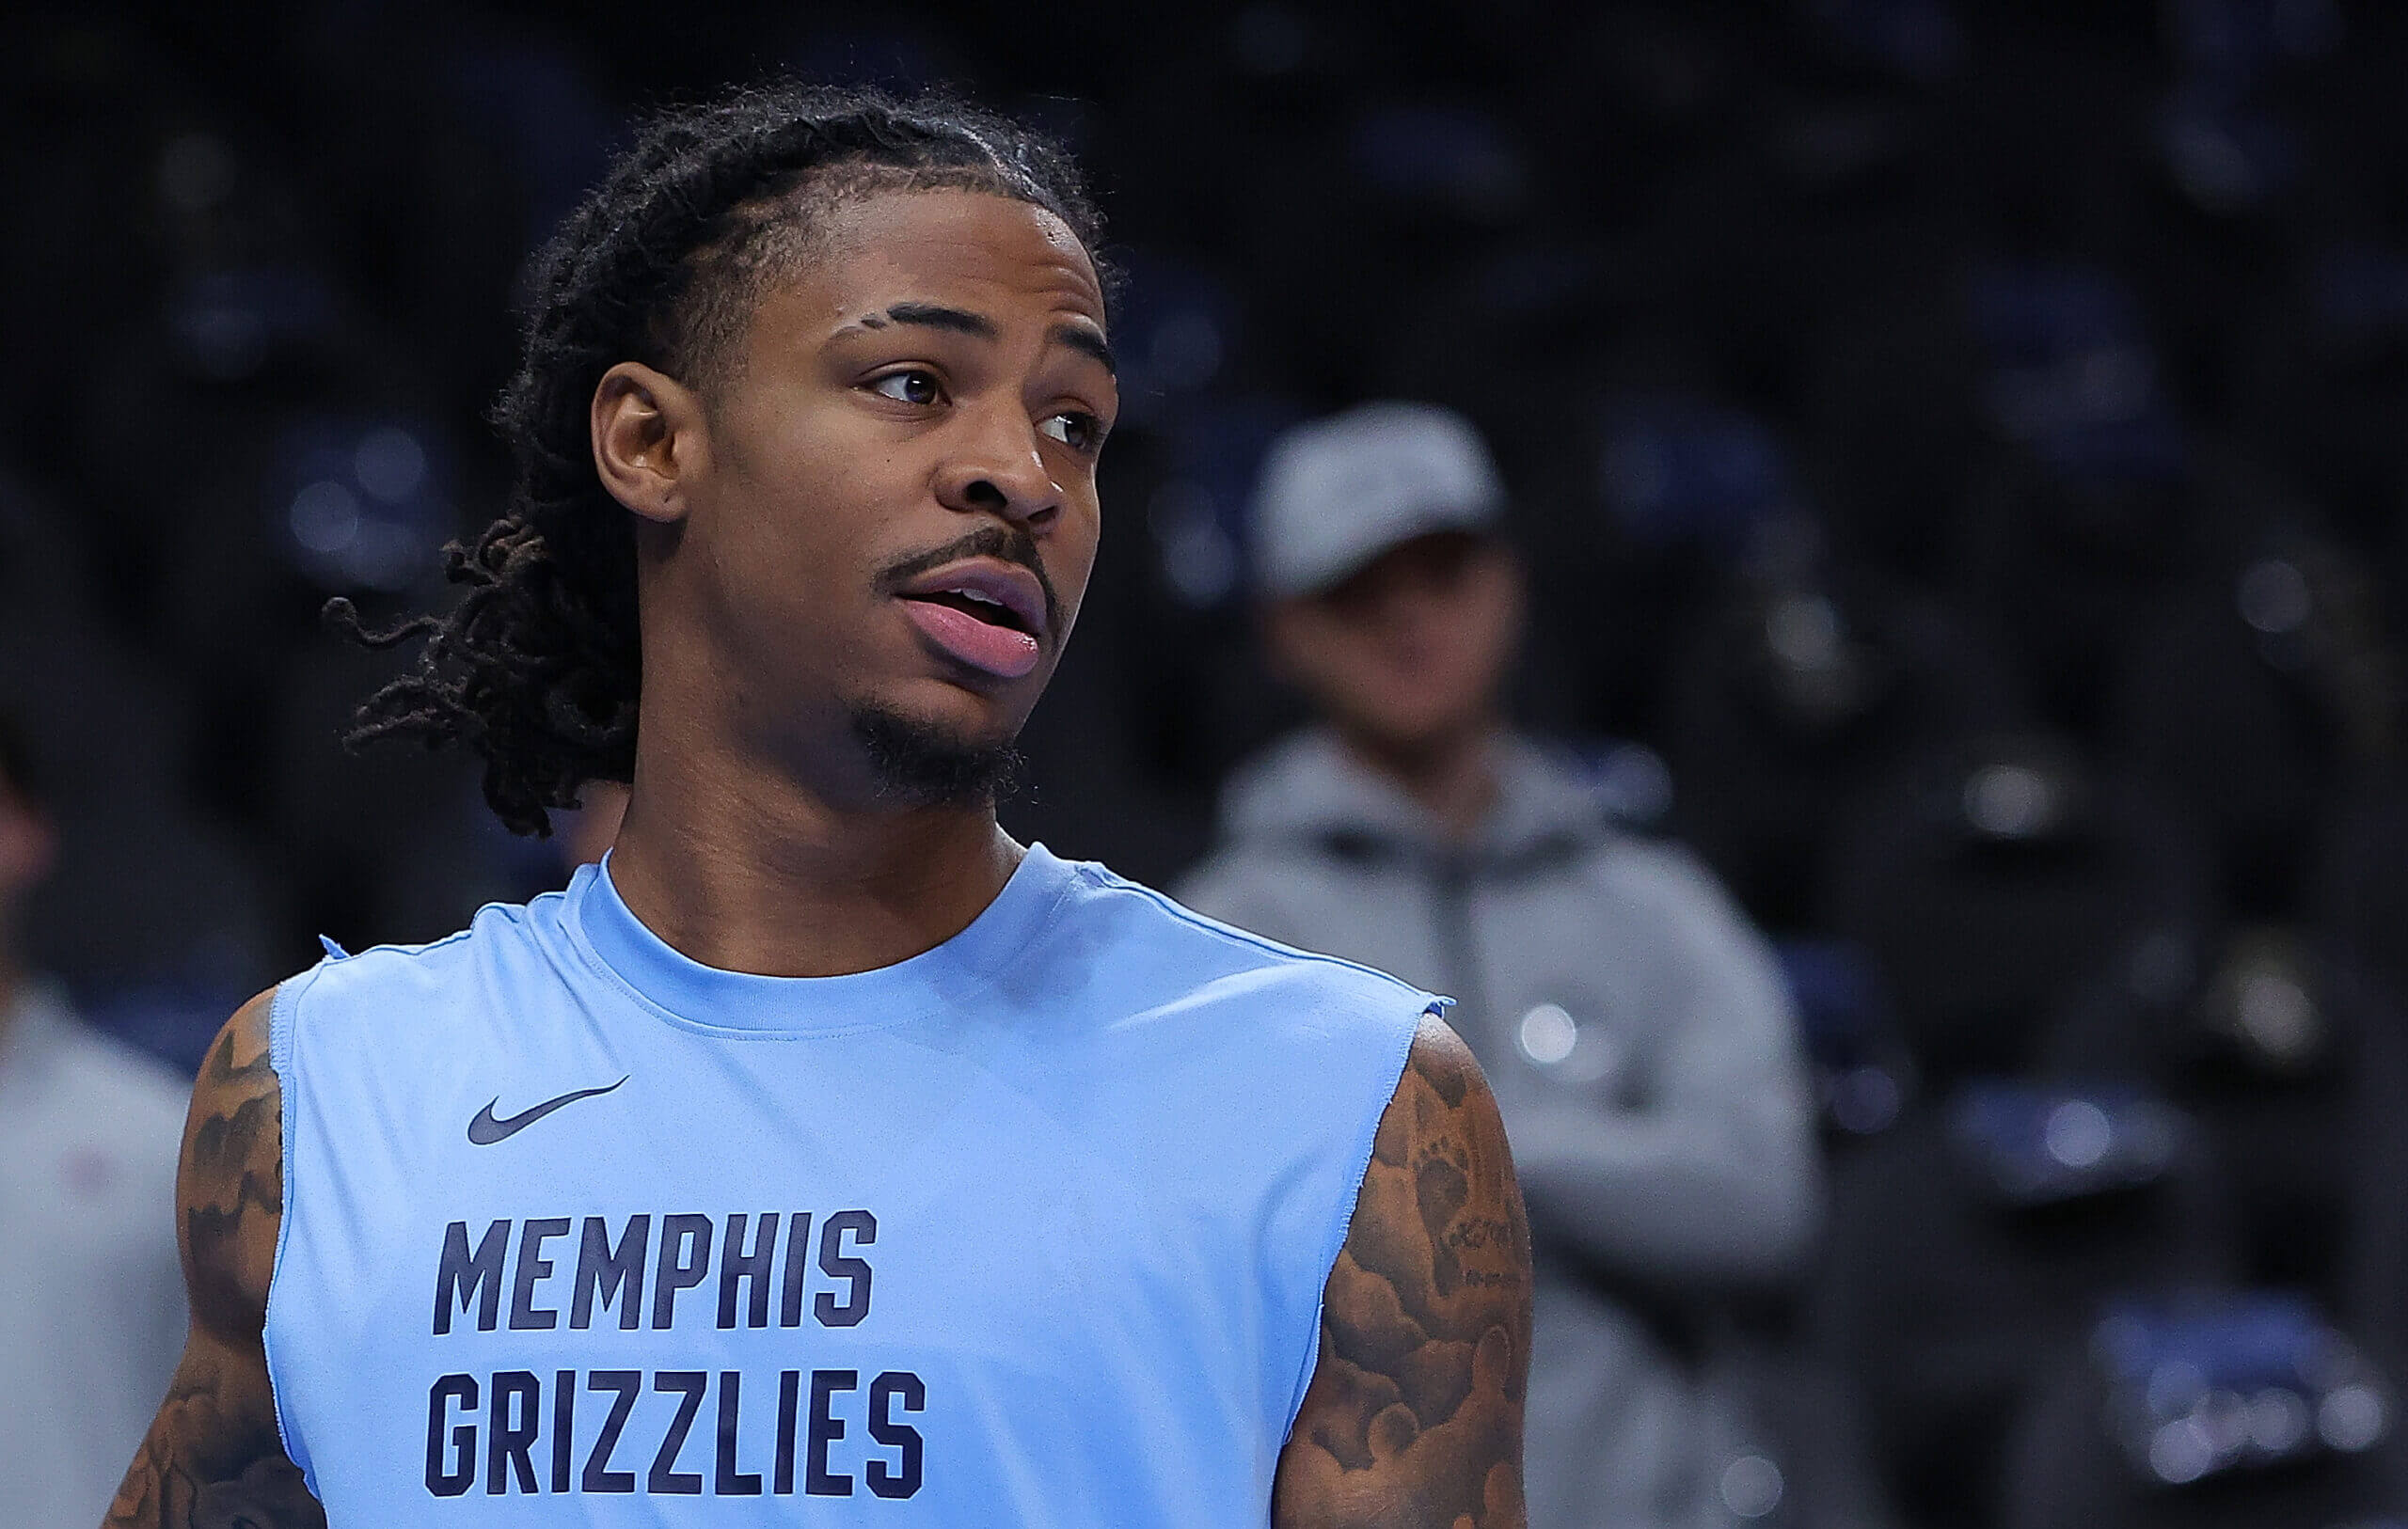 Tennessee judge rules Grizzlies’ Ja Morant acted in self defense in altercation with teenager